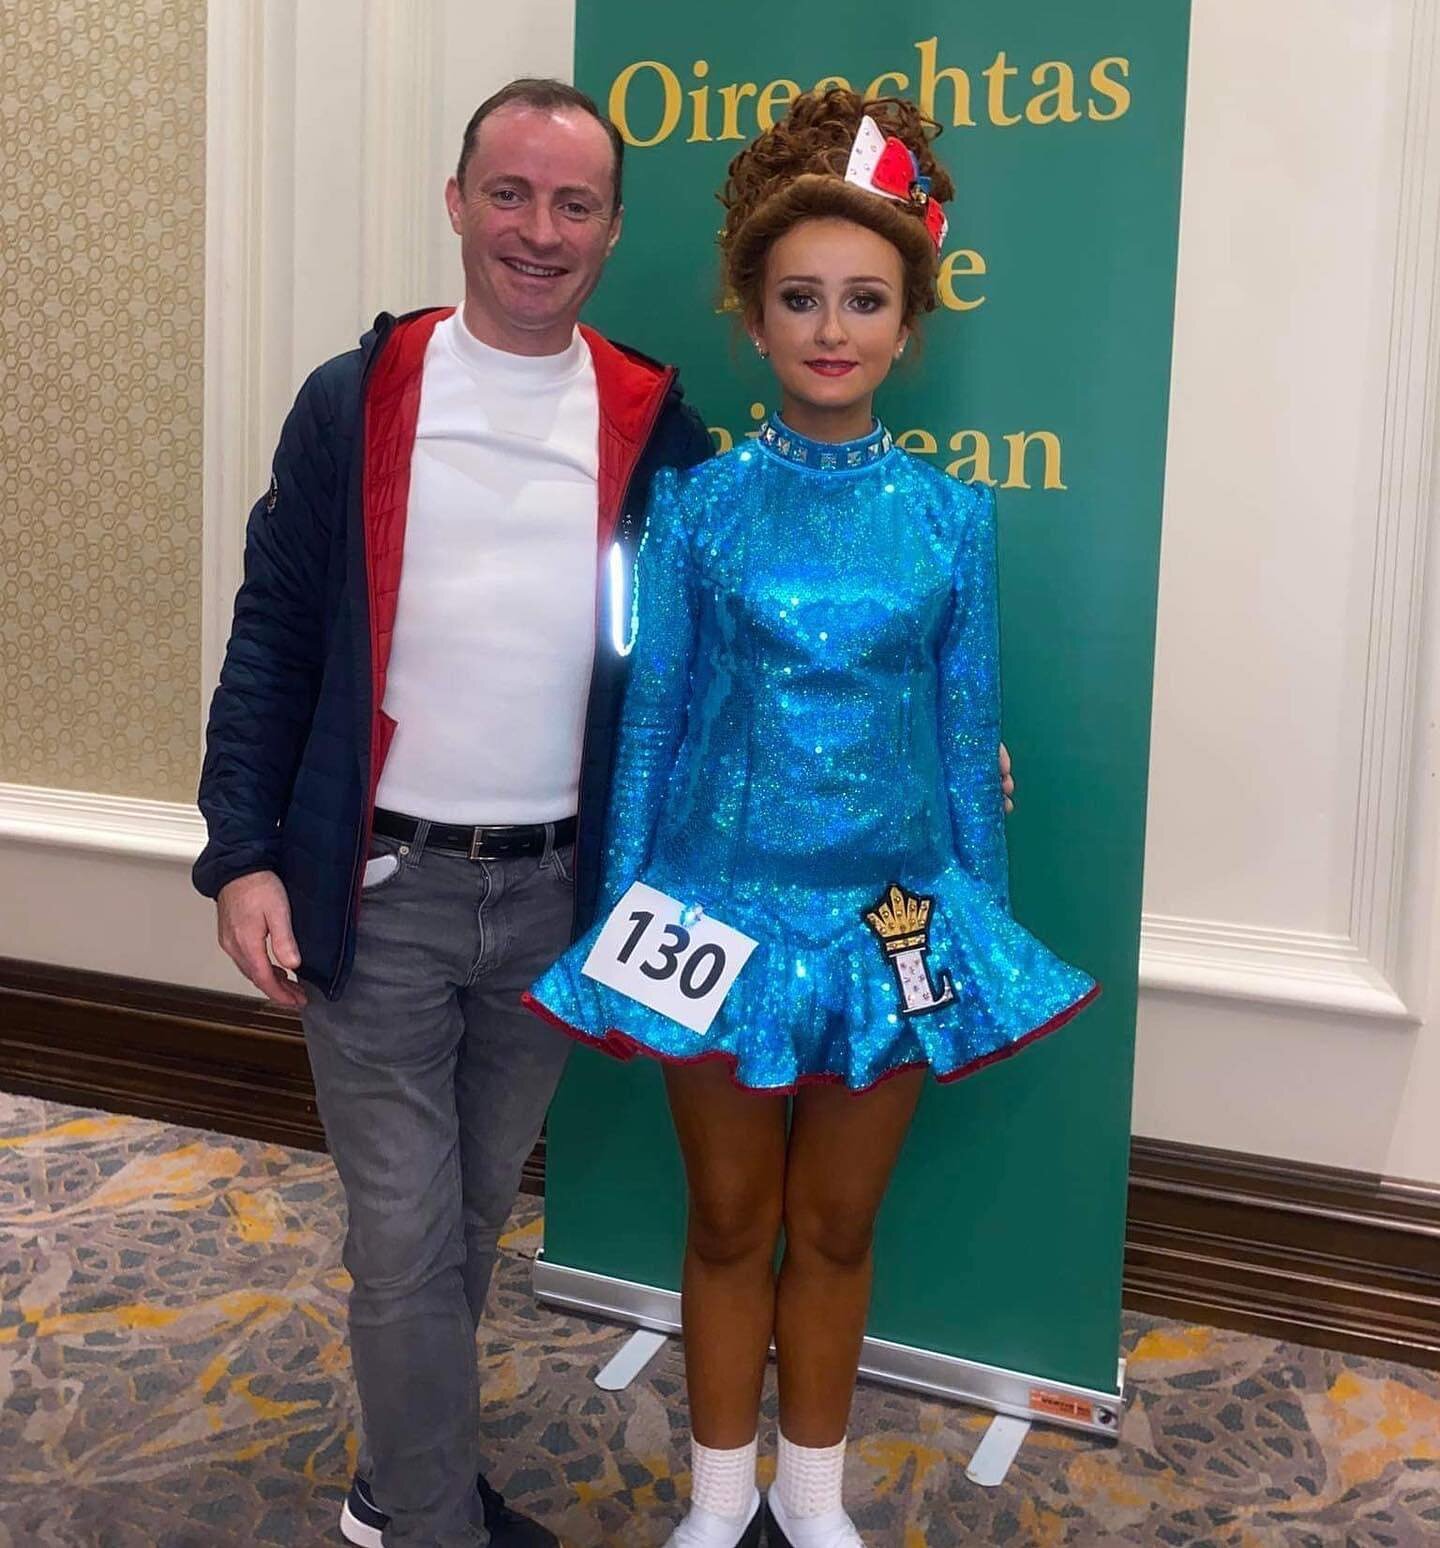 Congrats Laura Carty on a fabulous 16th place u13 in big numbers! You work so hard 👑 Onwards and upwards! Next stop: All Irelands ☘️☘️ 

#omg #irish #dance #leinster #omgirishdance